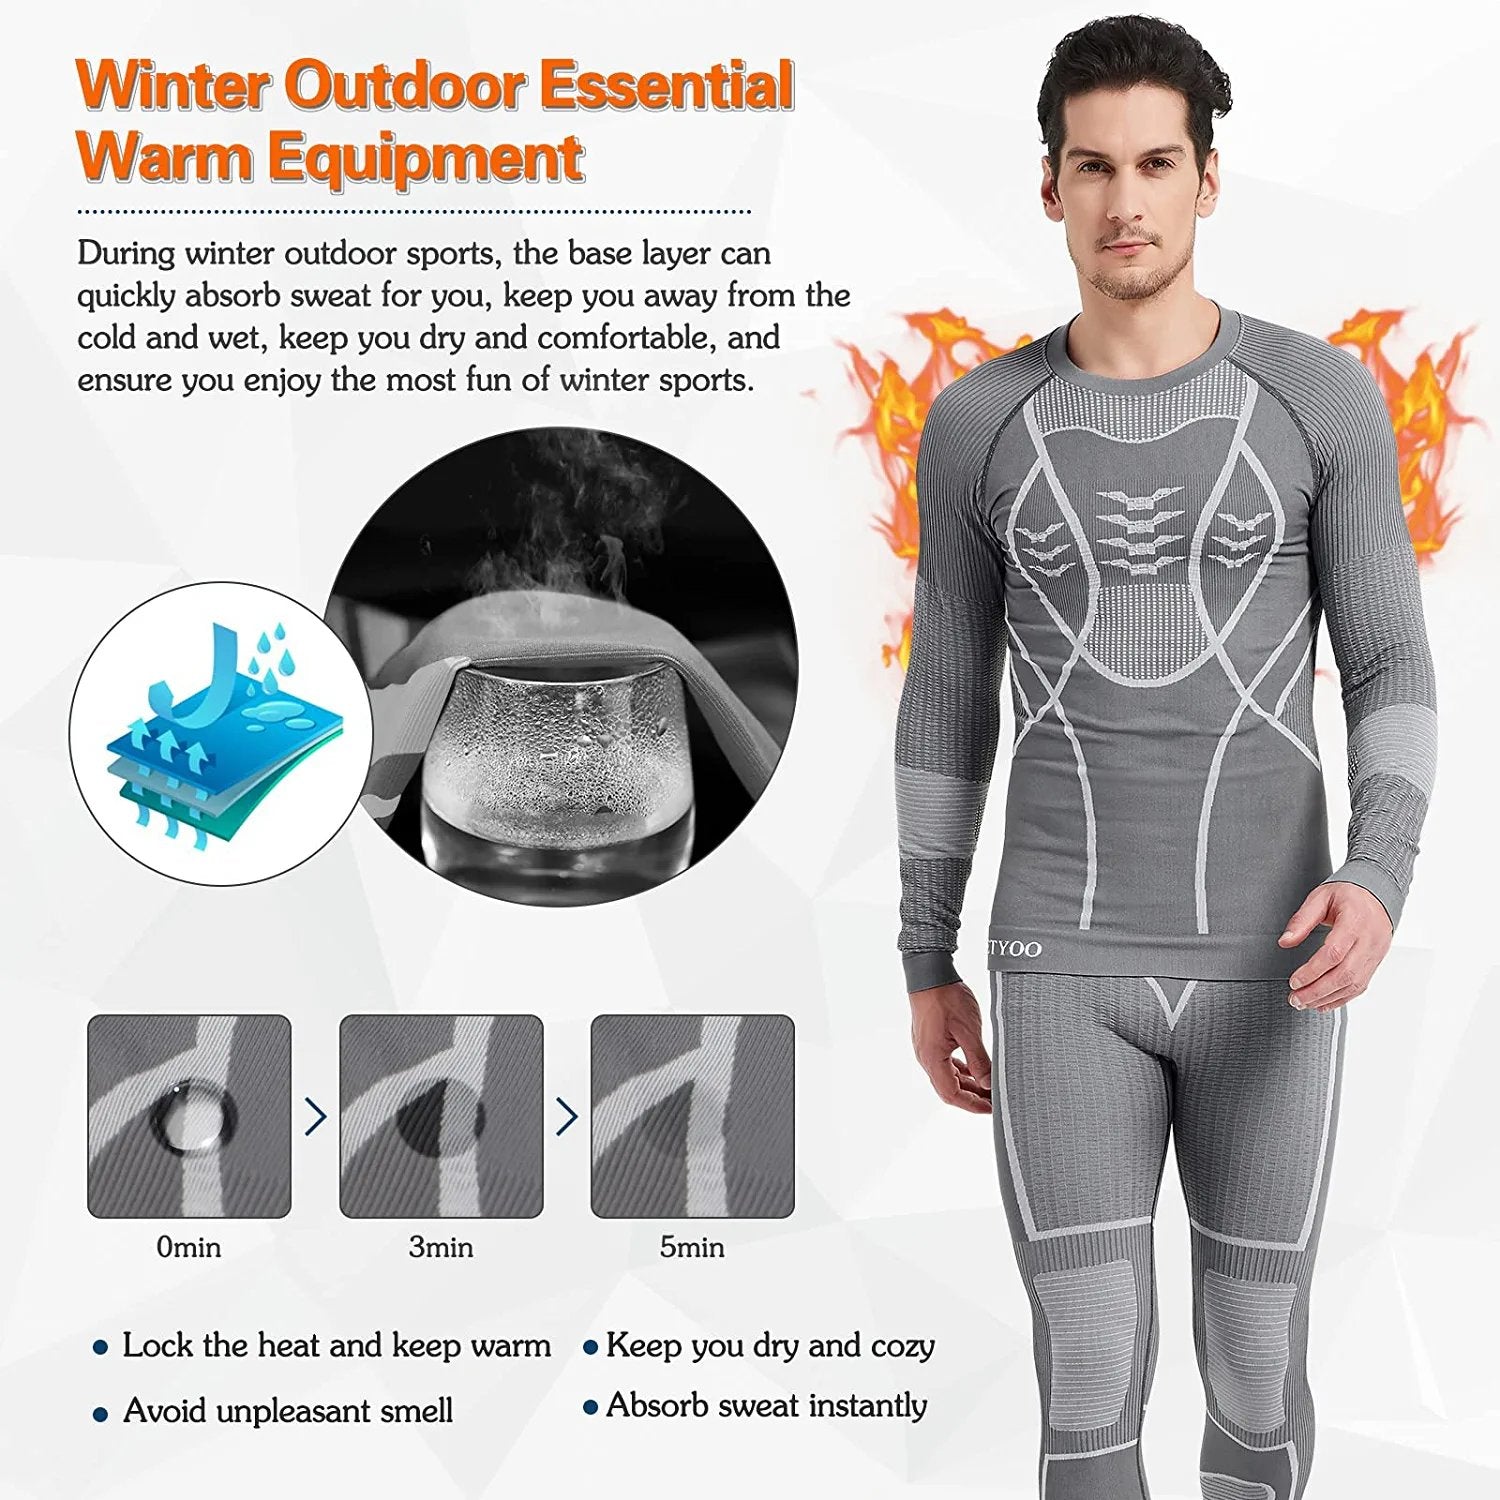 MEETWEE Womens Thermal Underwear Set, Winter Compression Long Johns Base  Layer Skiing US 